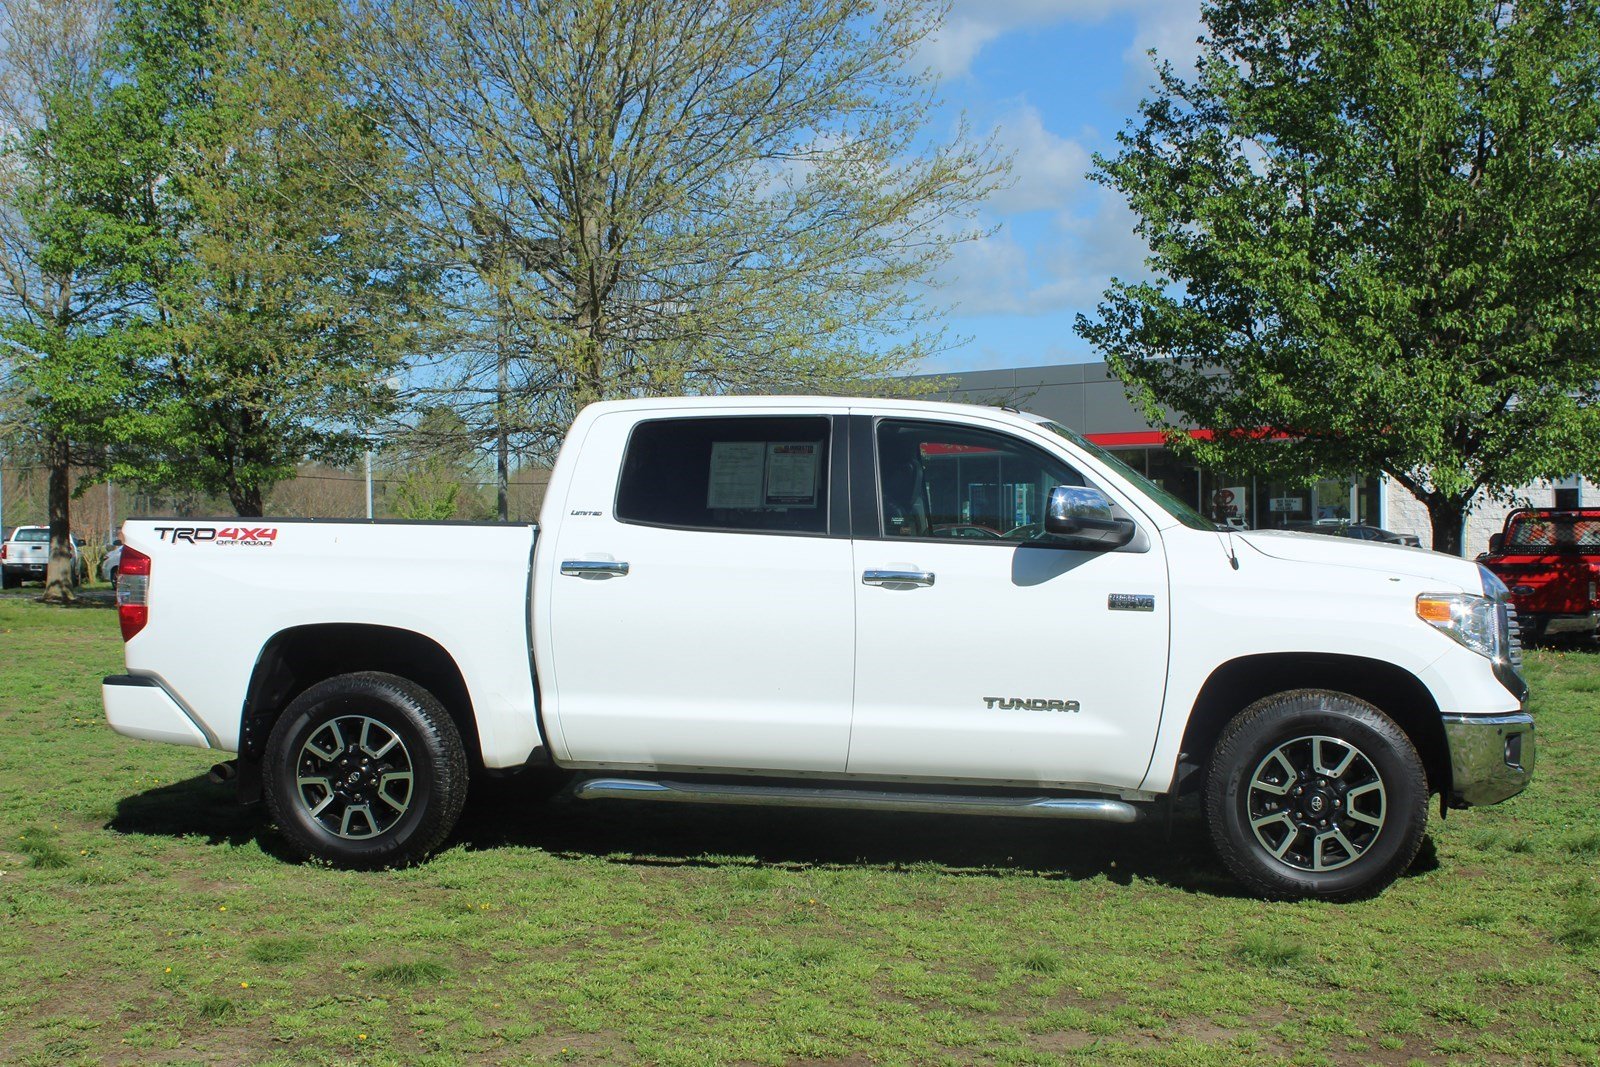 Pre-Owned 2017 Toyota Tundra 4WD Limited Crew Cab Pickup in Gloucester